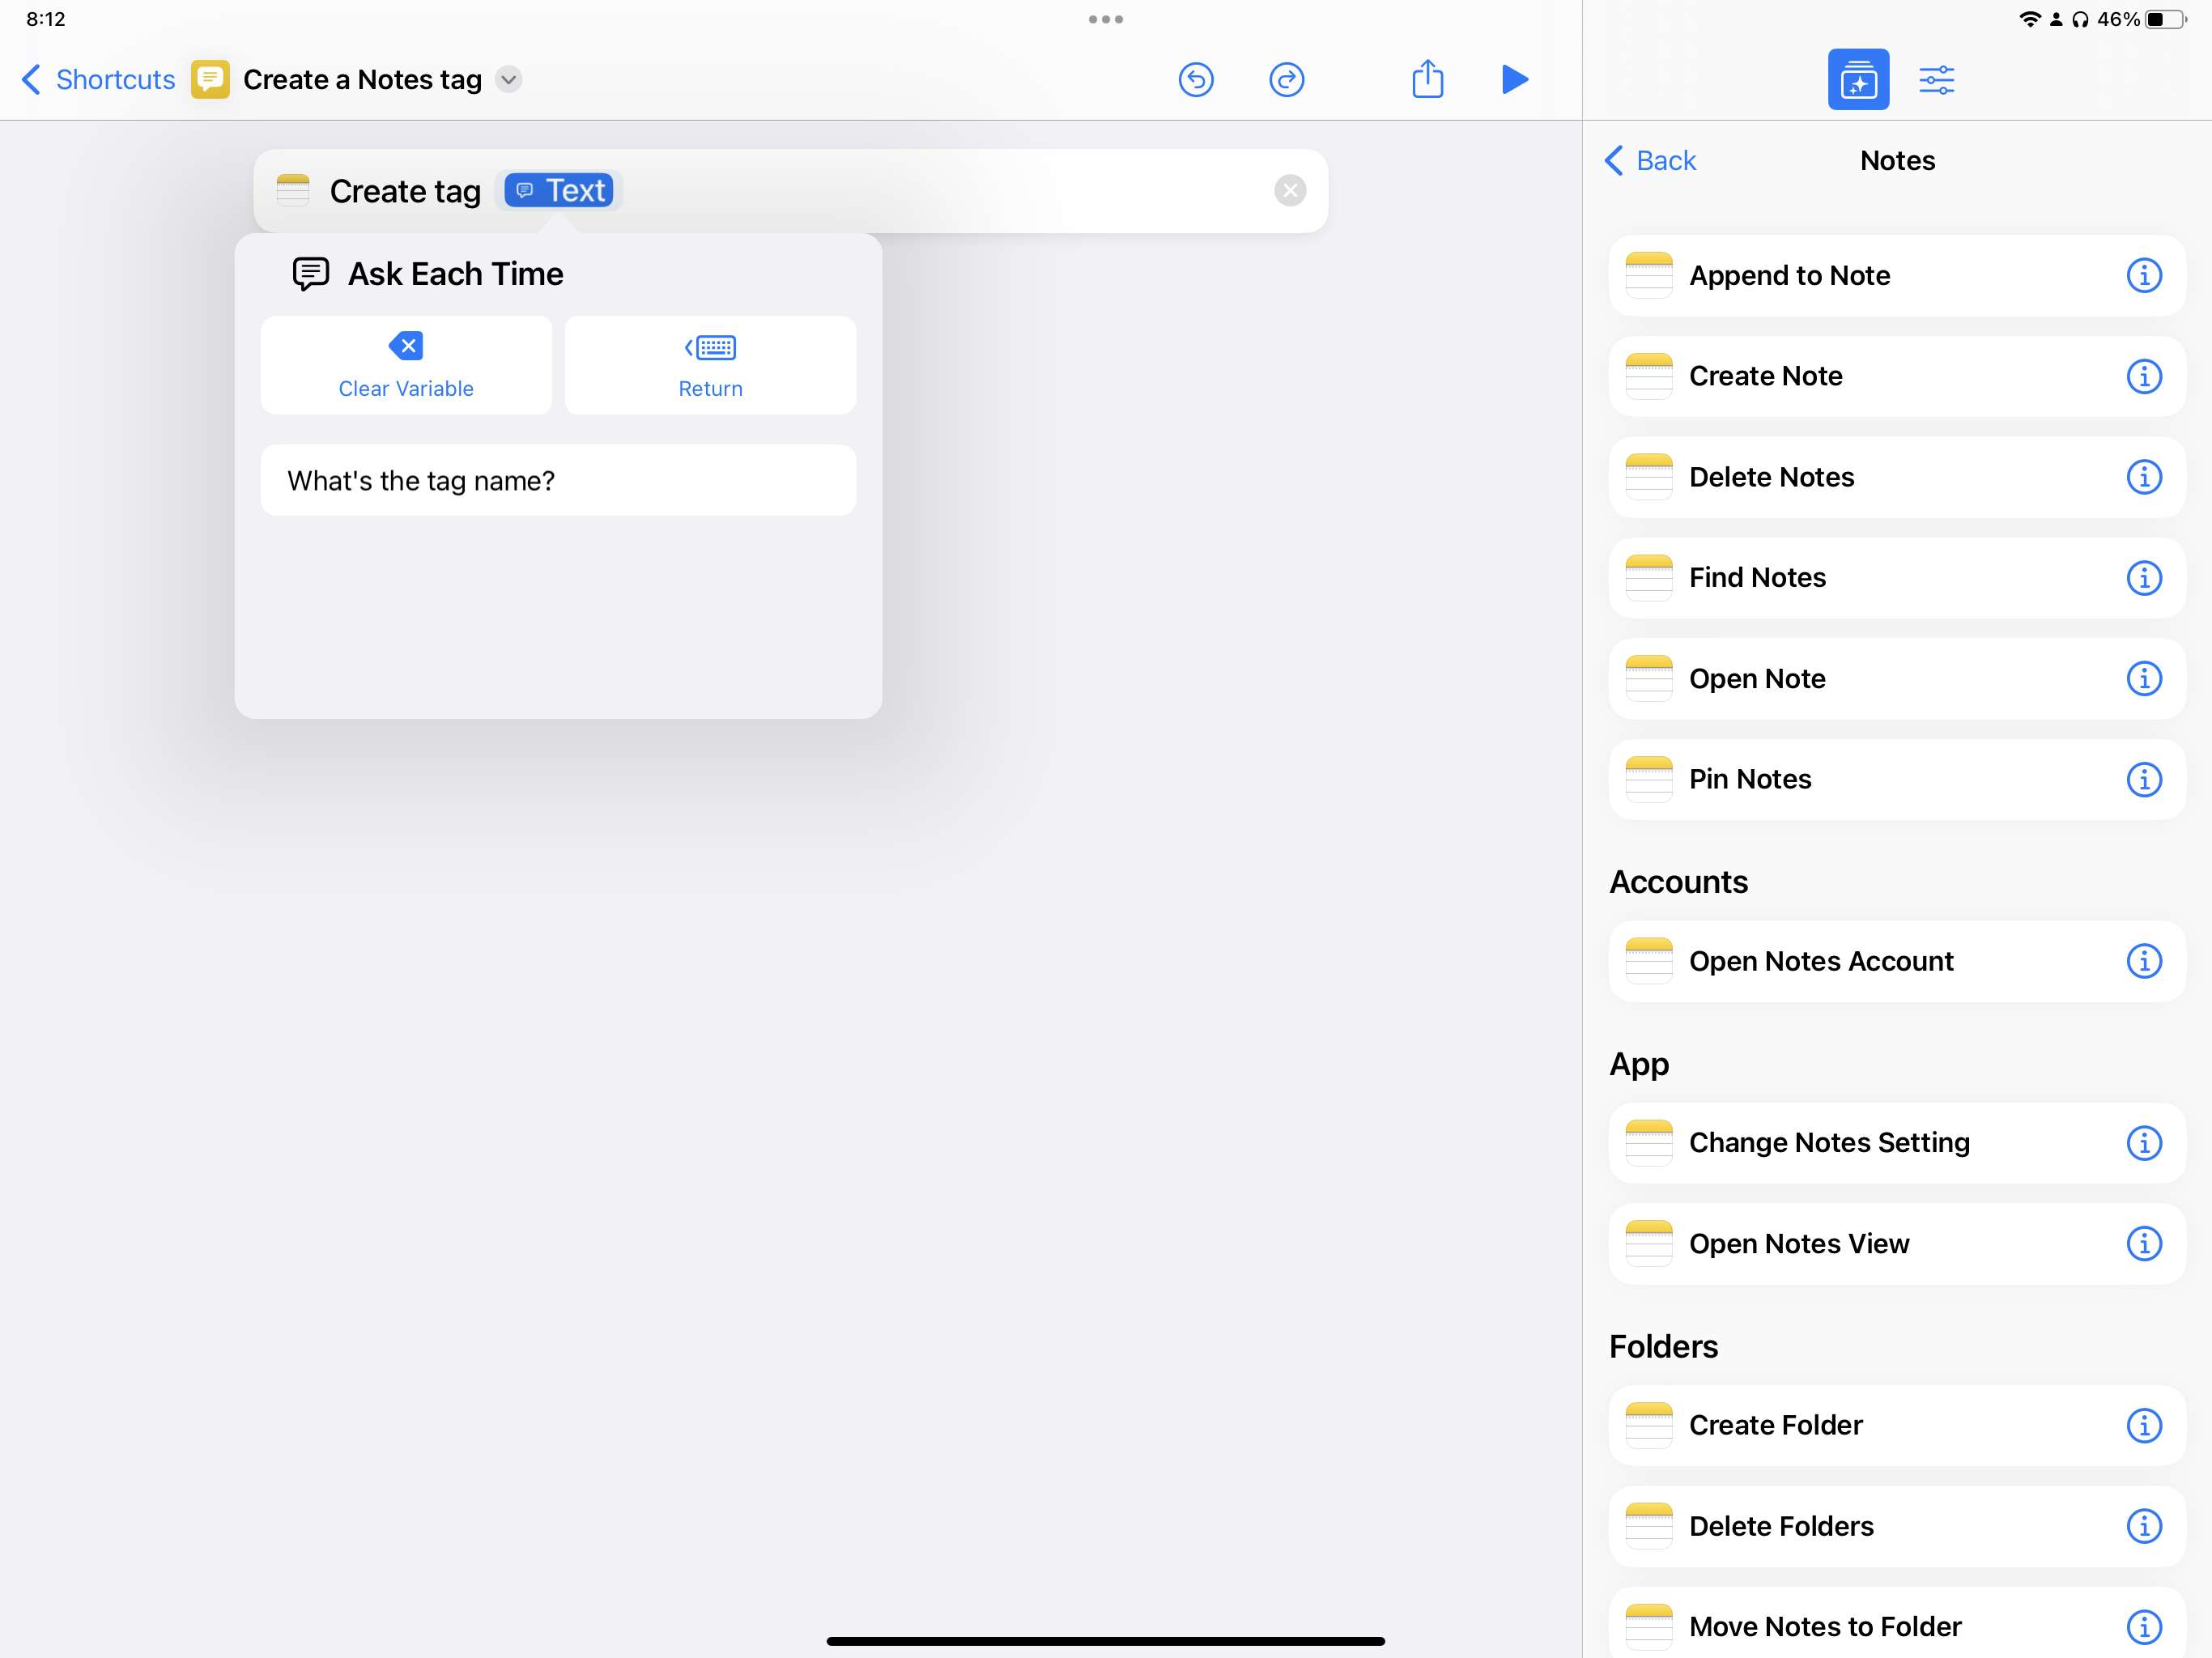 Screenshot showing example popover for Ask Each Time in Shortcuts.